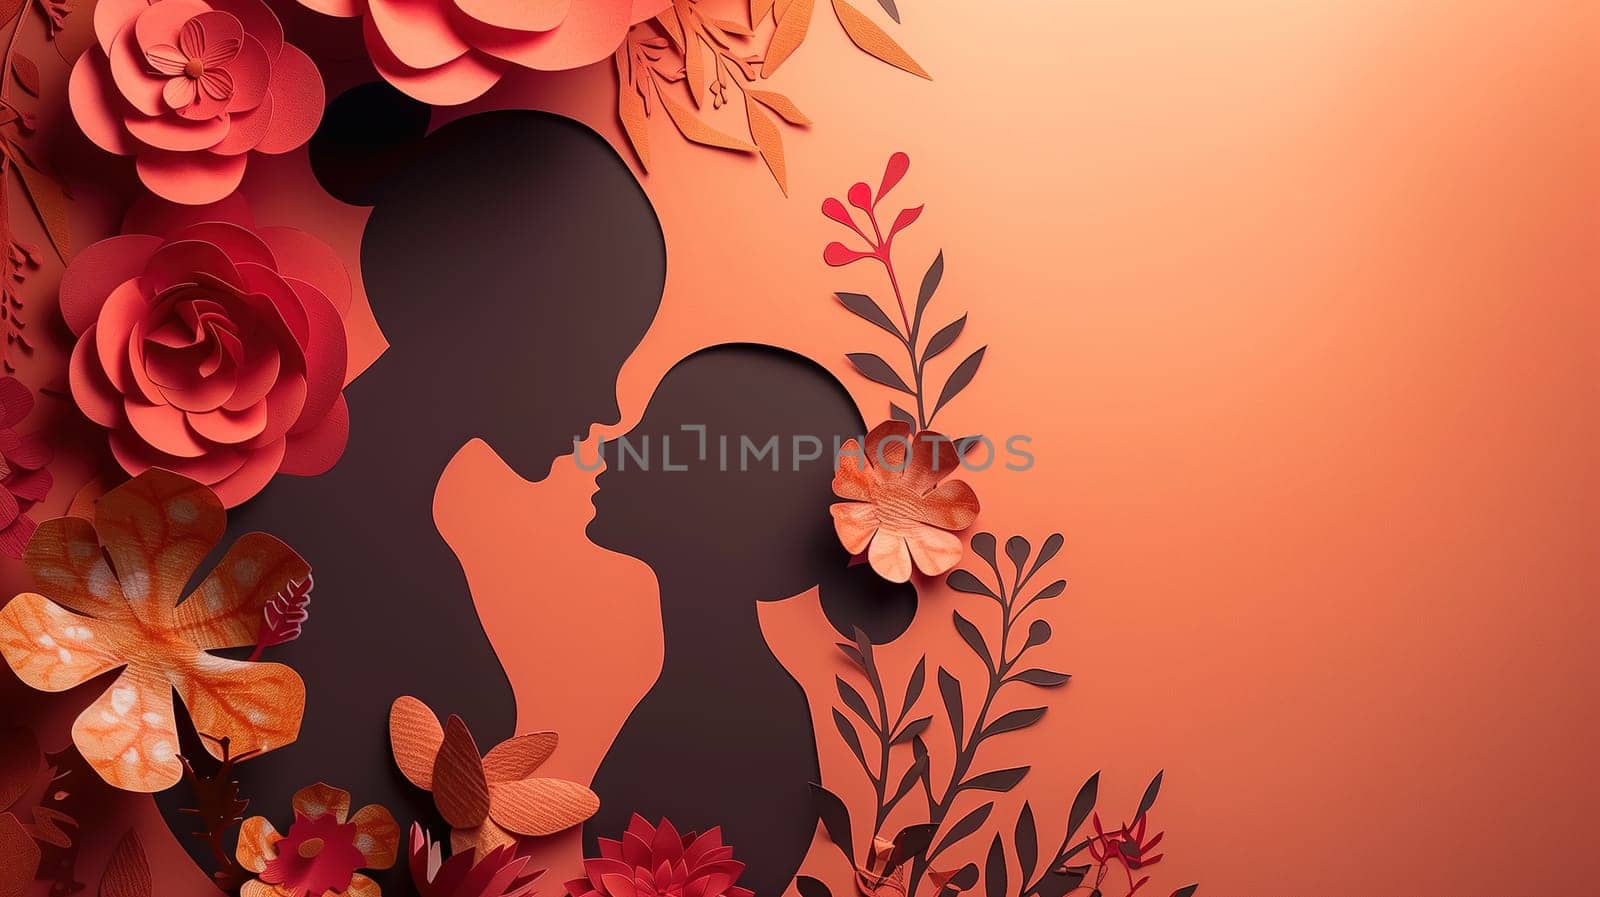 A paper cut artwork featuring a couple standing together surrounded by delicate paper flowers. The intricate design portrays love and nature in a unique way.